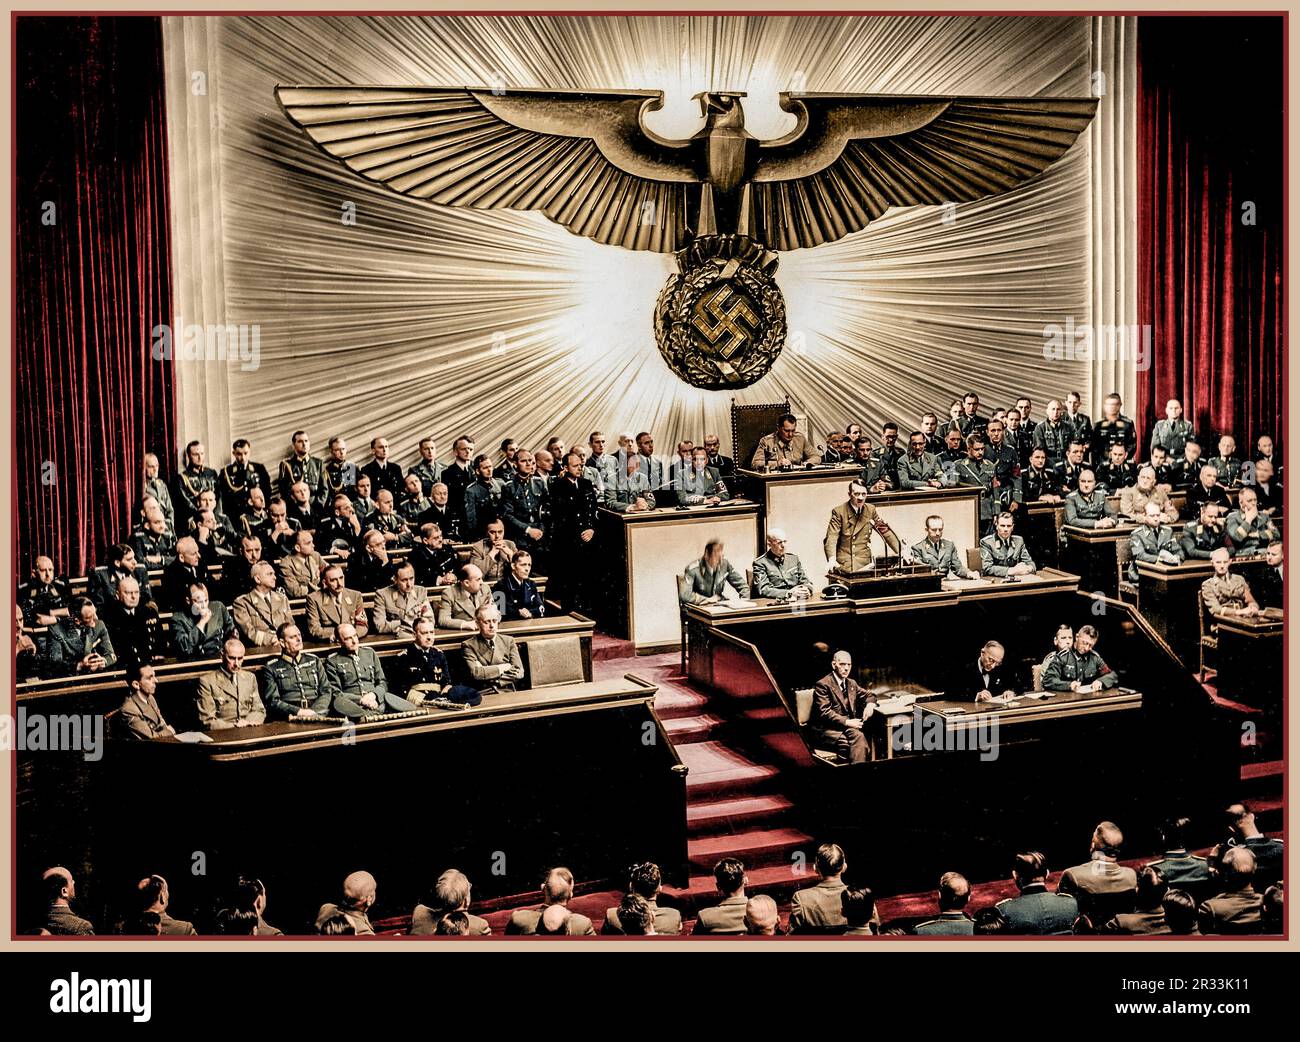 Adolf Hitler delivering a speech at Kroll Opera House (colour image) before the men of the Reichstag on the subject of Roosevelt and the war in the Pacific, declaring war on the United States. Next to Hitler in the government benches (from right to left) are Joachim von Ribbentrop, Erich Raeder, Walther von Brauchitsch, Wilhelm Keitel, Wilhelm Frick and Joseph Goebbels. 28/4/1939 Stock Photo